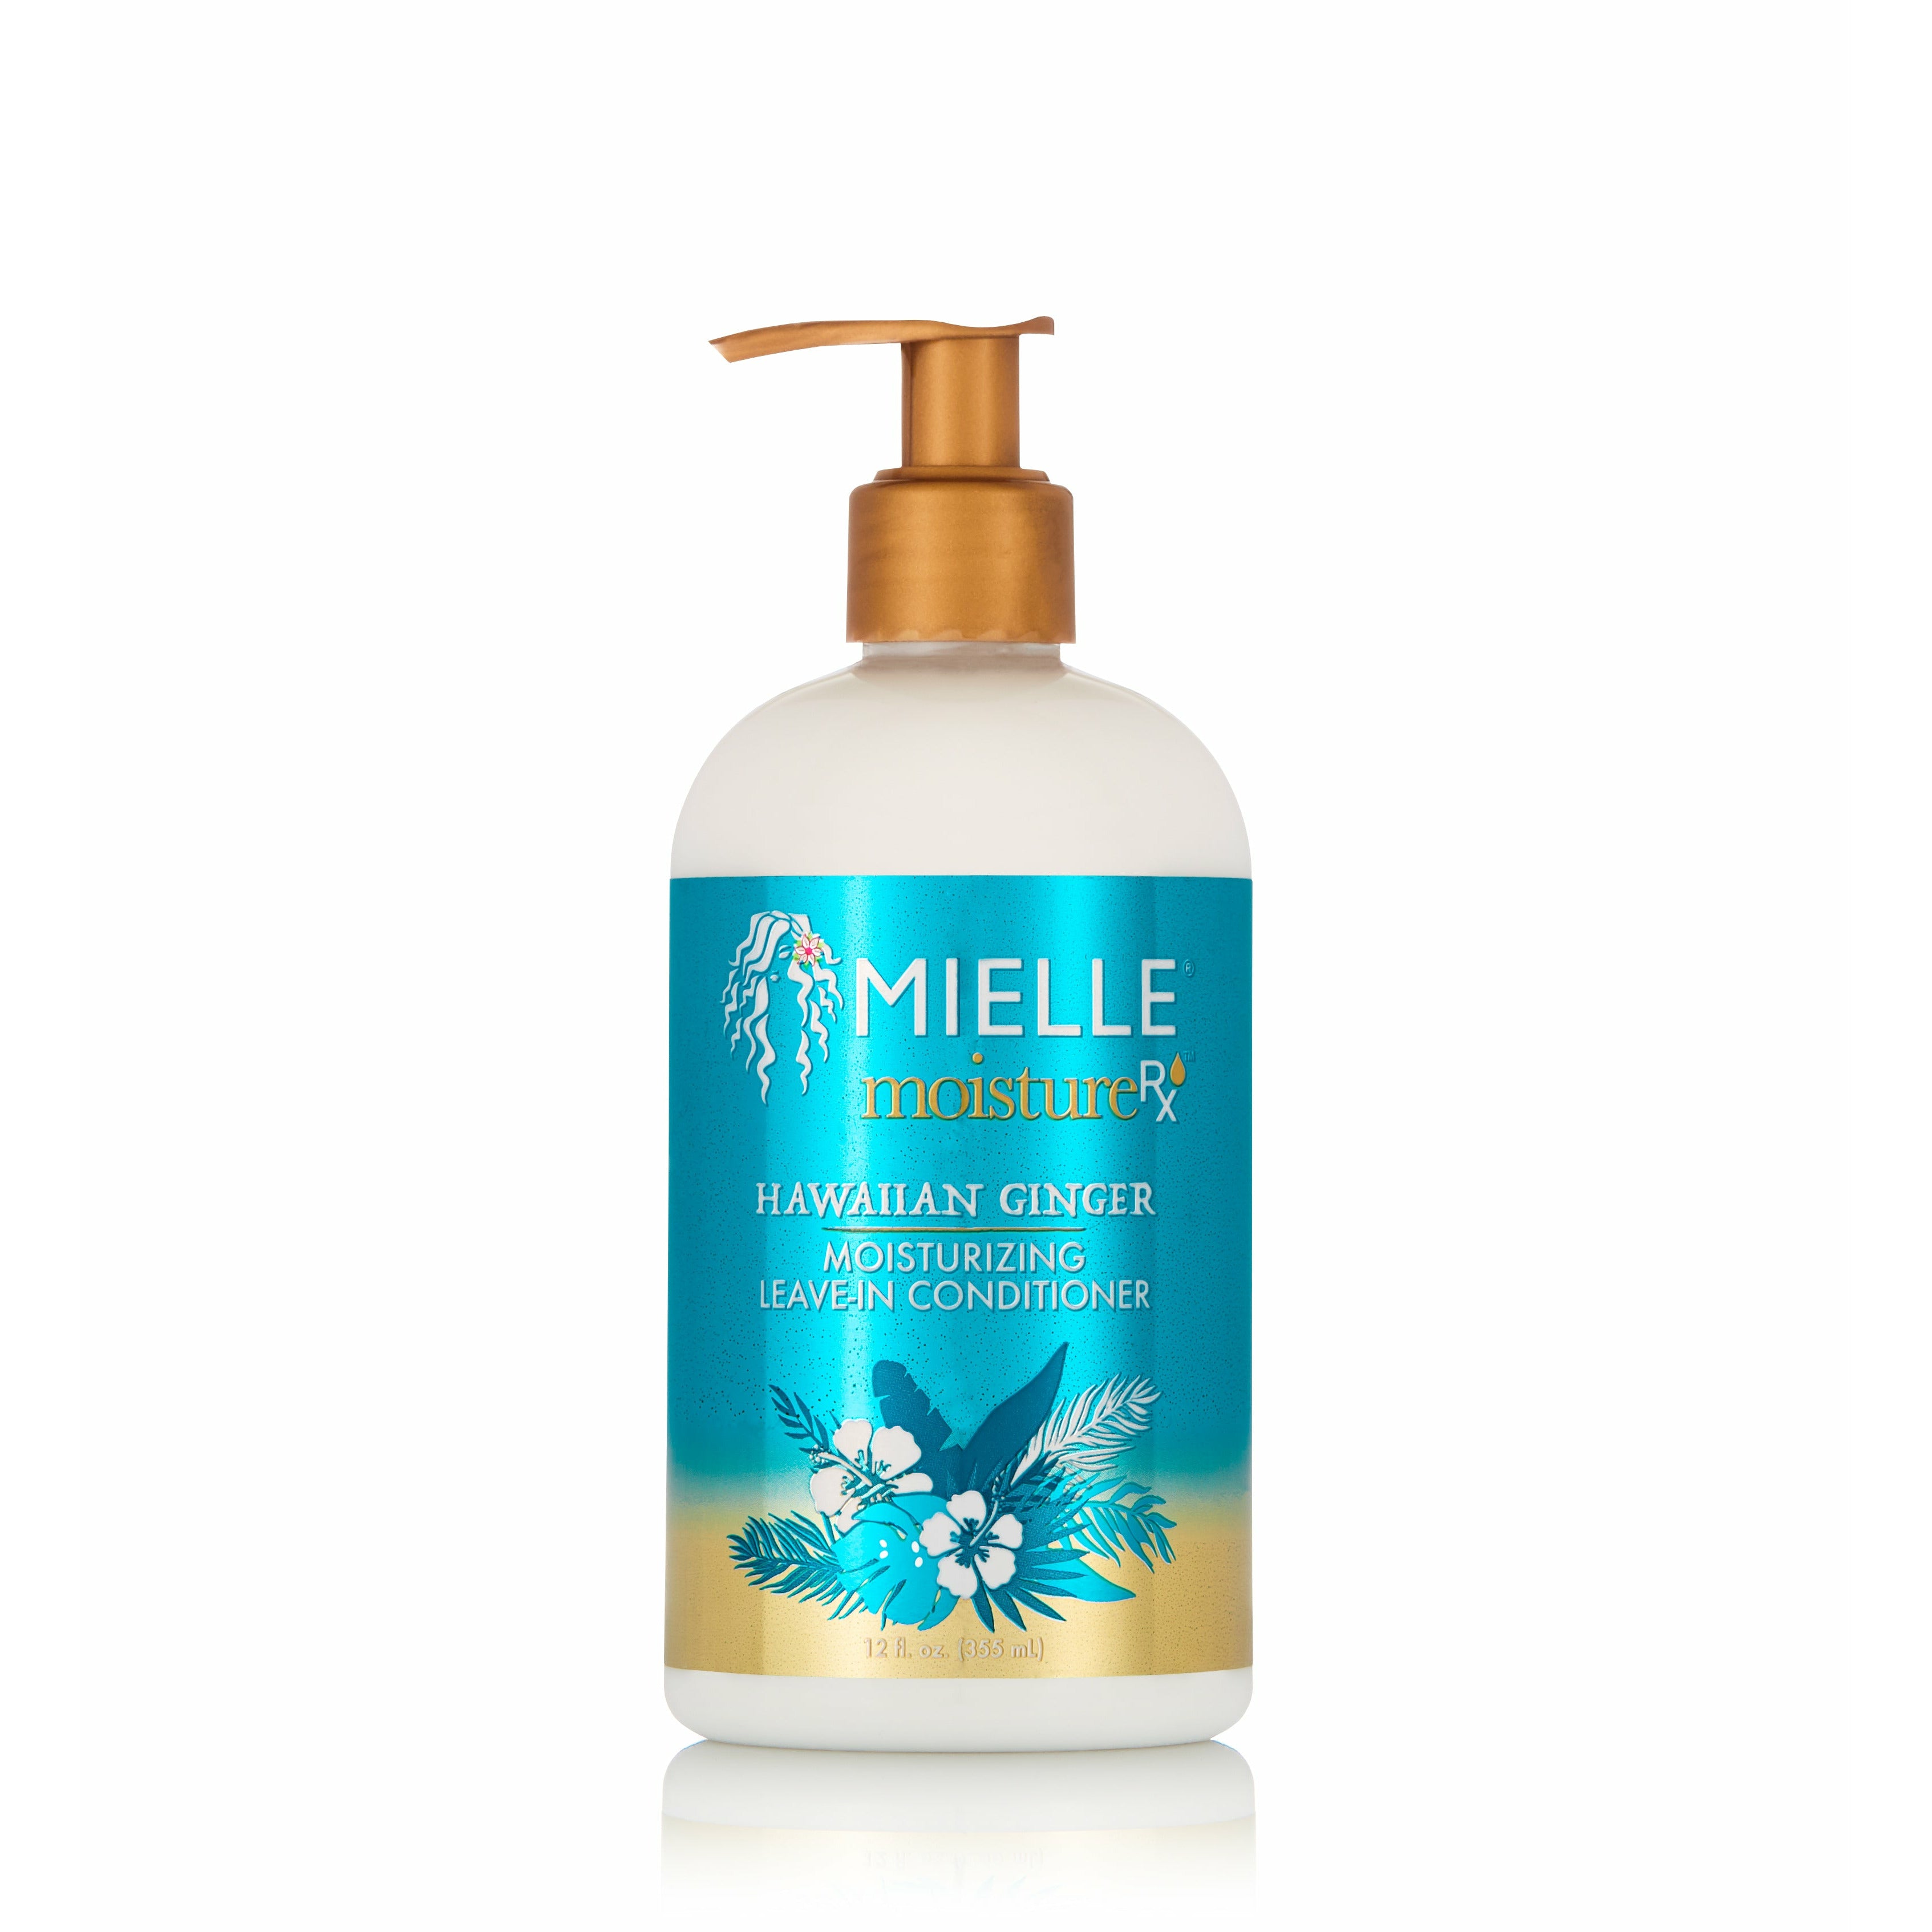 Mielle Moisture Rx Leave in Conditioner, Hawaiian Ginger